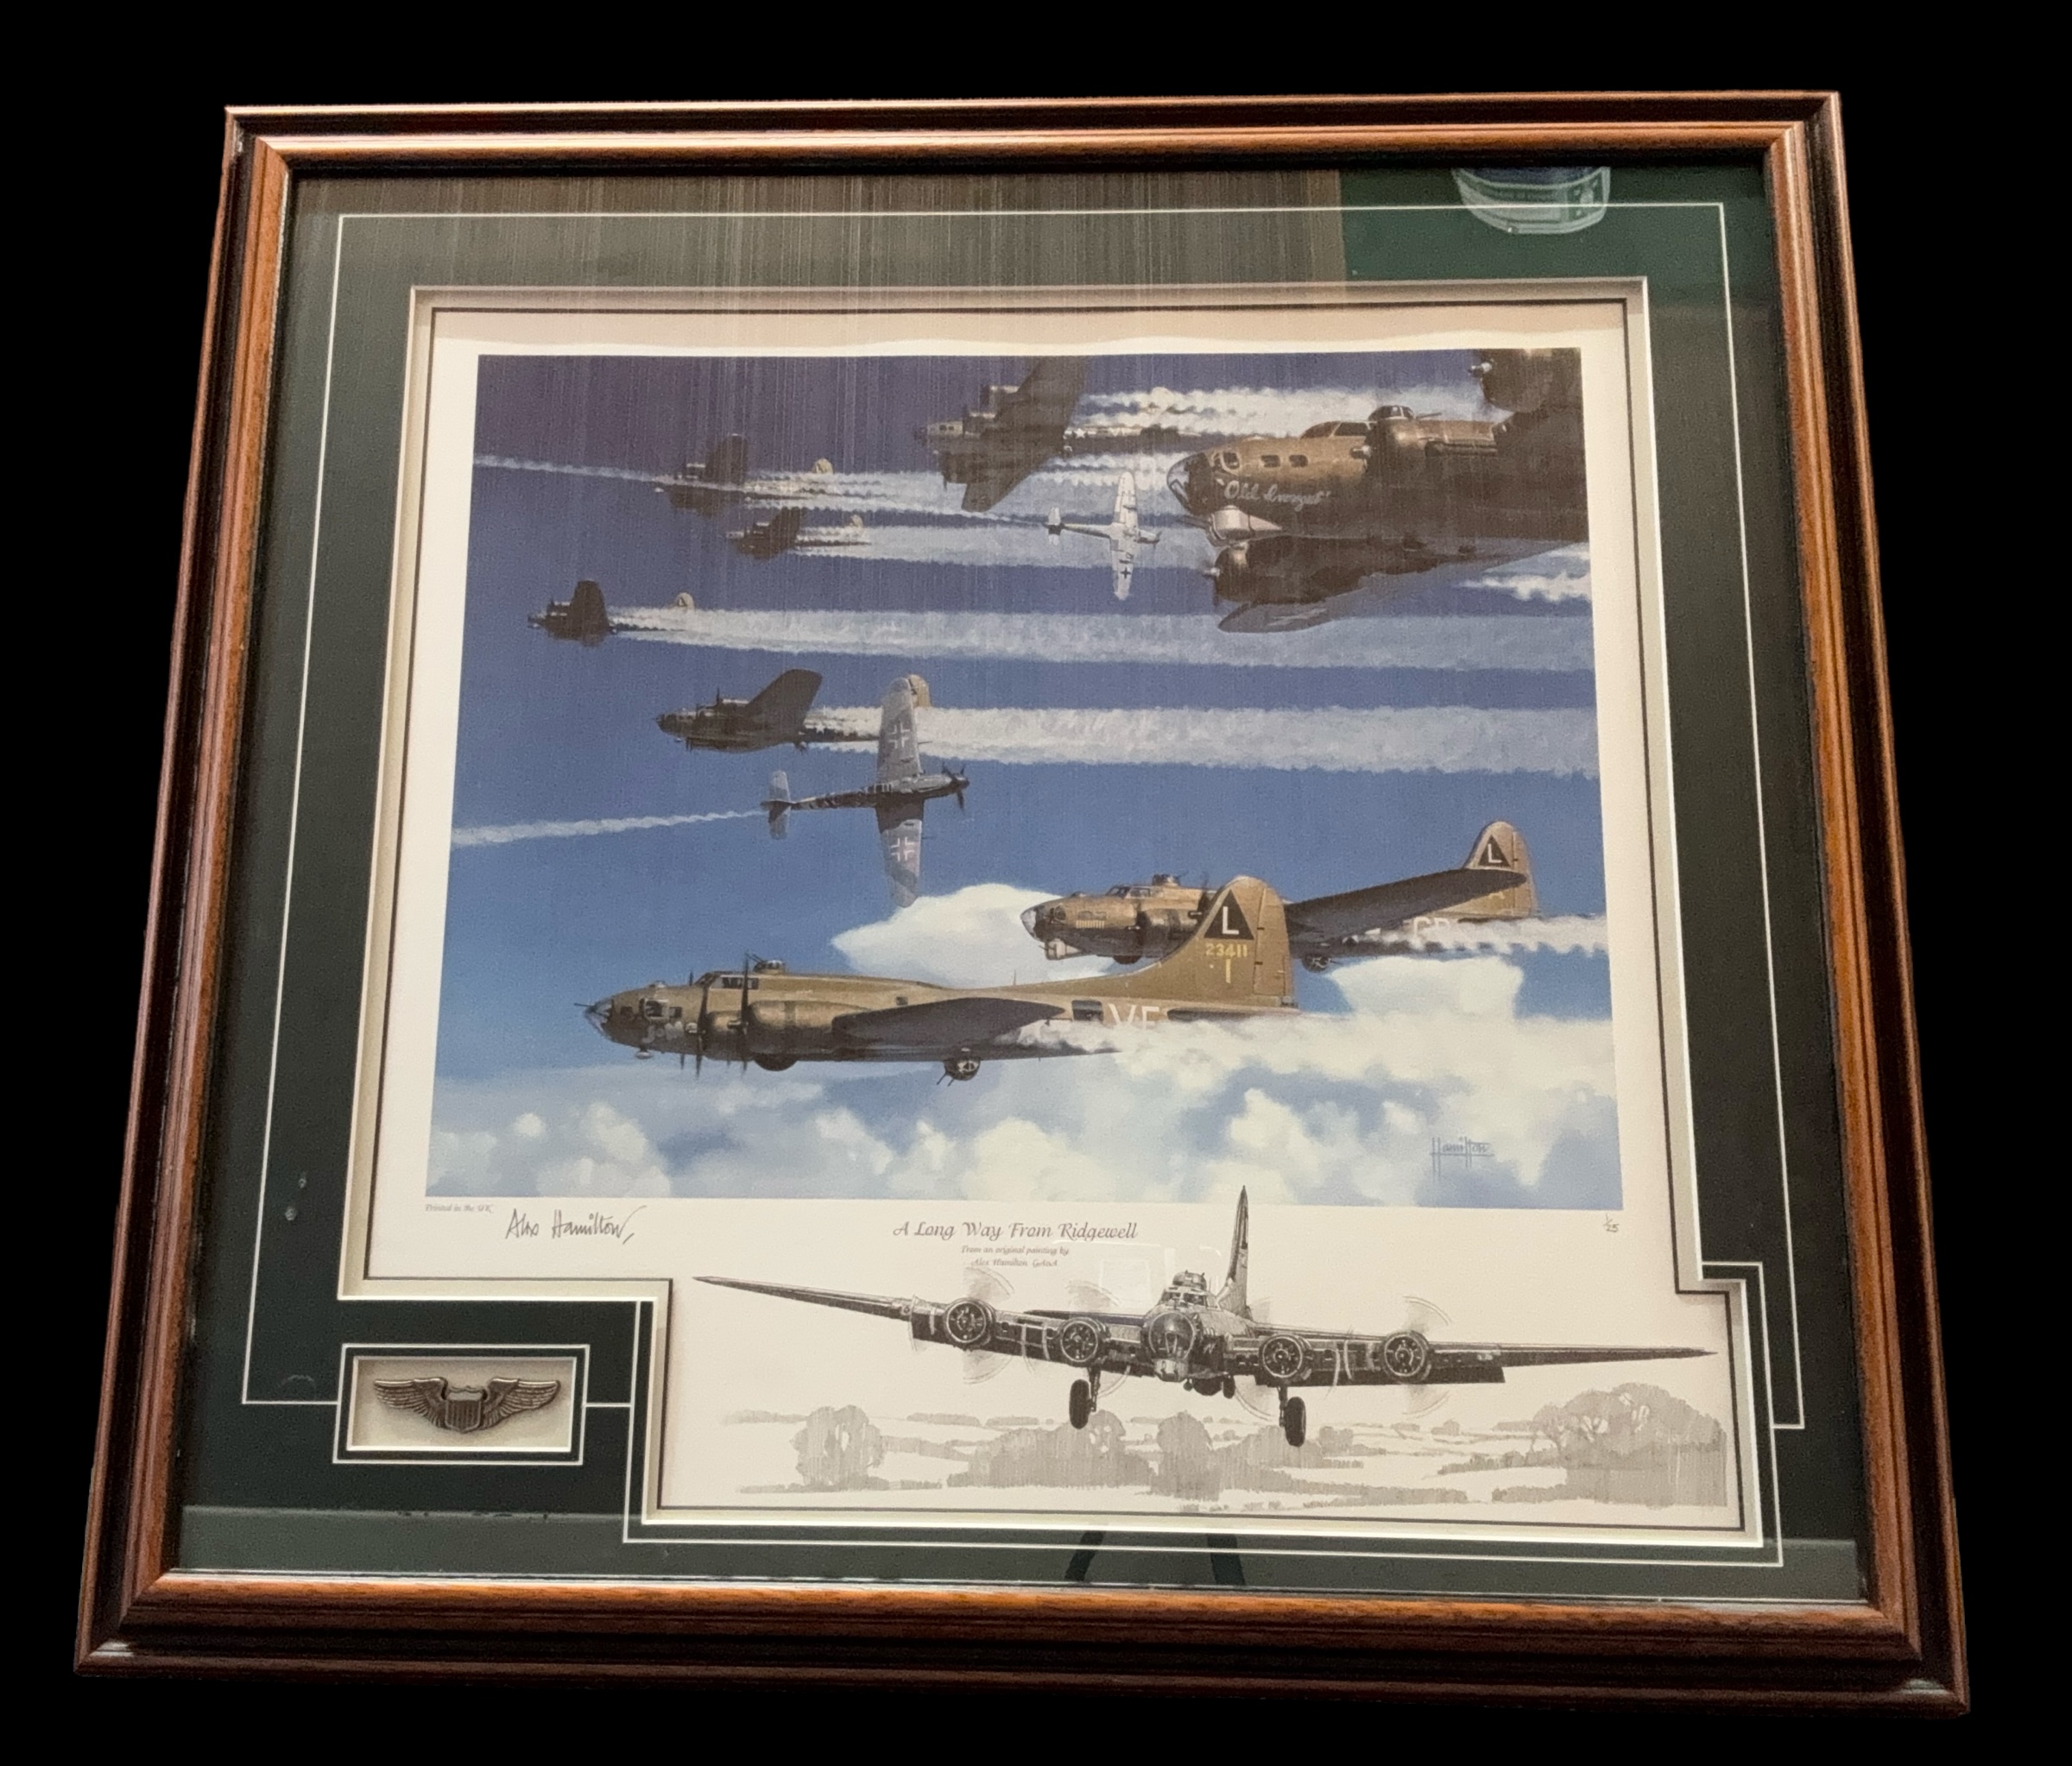 WW2 Print titled A Long Way from Ridgewell by Alex Hamilton. Limited 1/25, signed by the artist Alex - Image 3 of 3